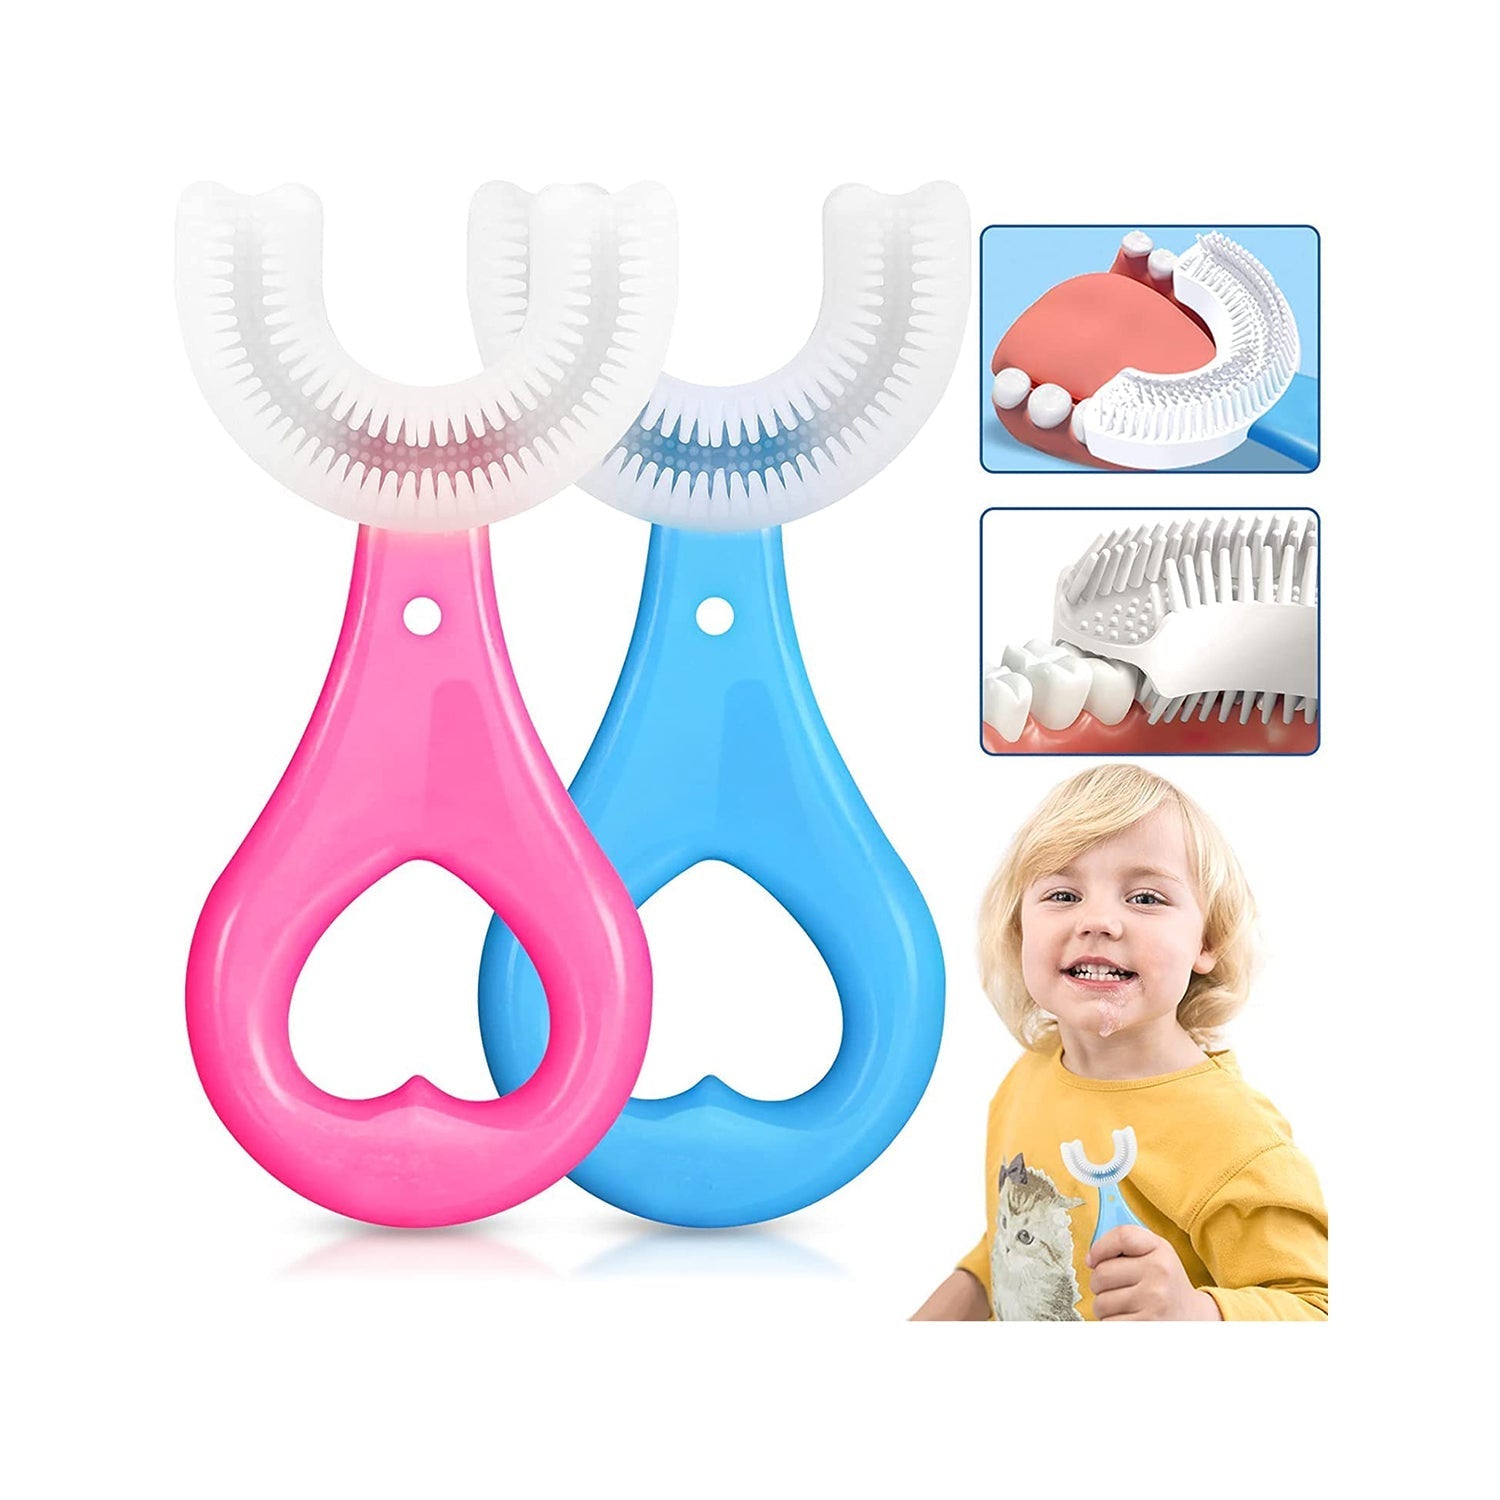 4002 U Shaped Toothbrush for Kids, 2-6 Years Kids Baby Infant Toothbrush, Food Grade Ultra Soft Silicone Brush Head 